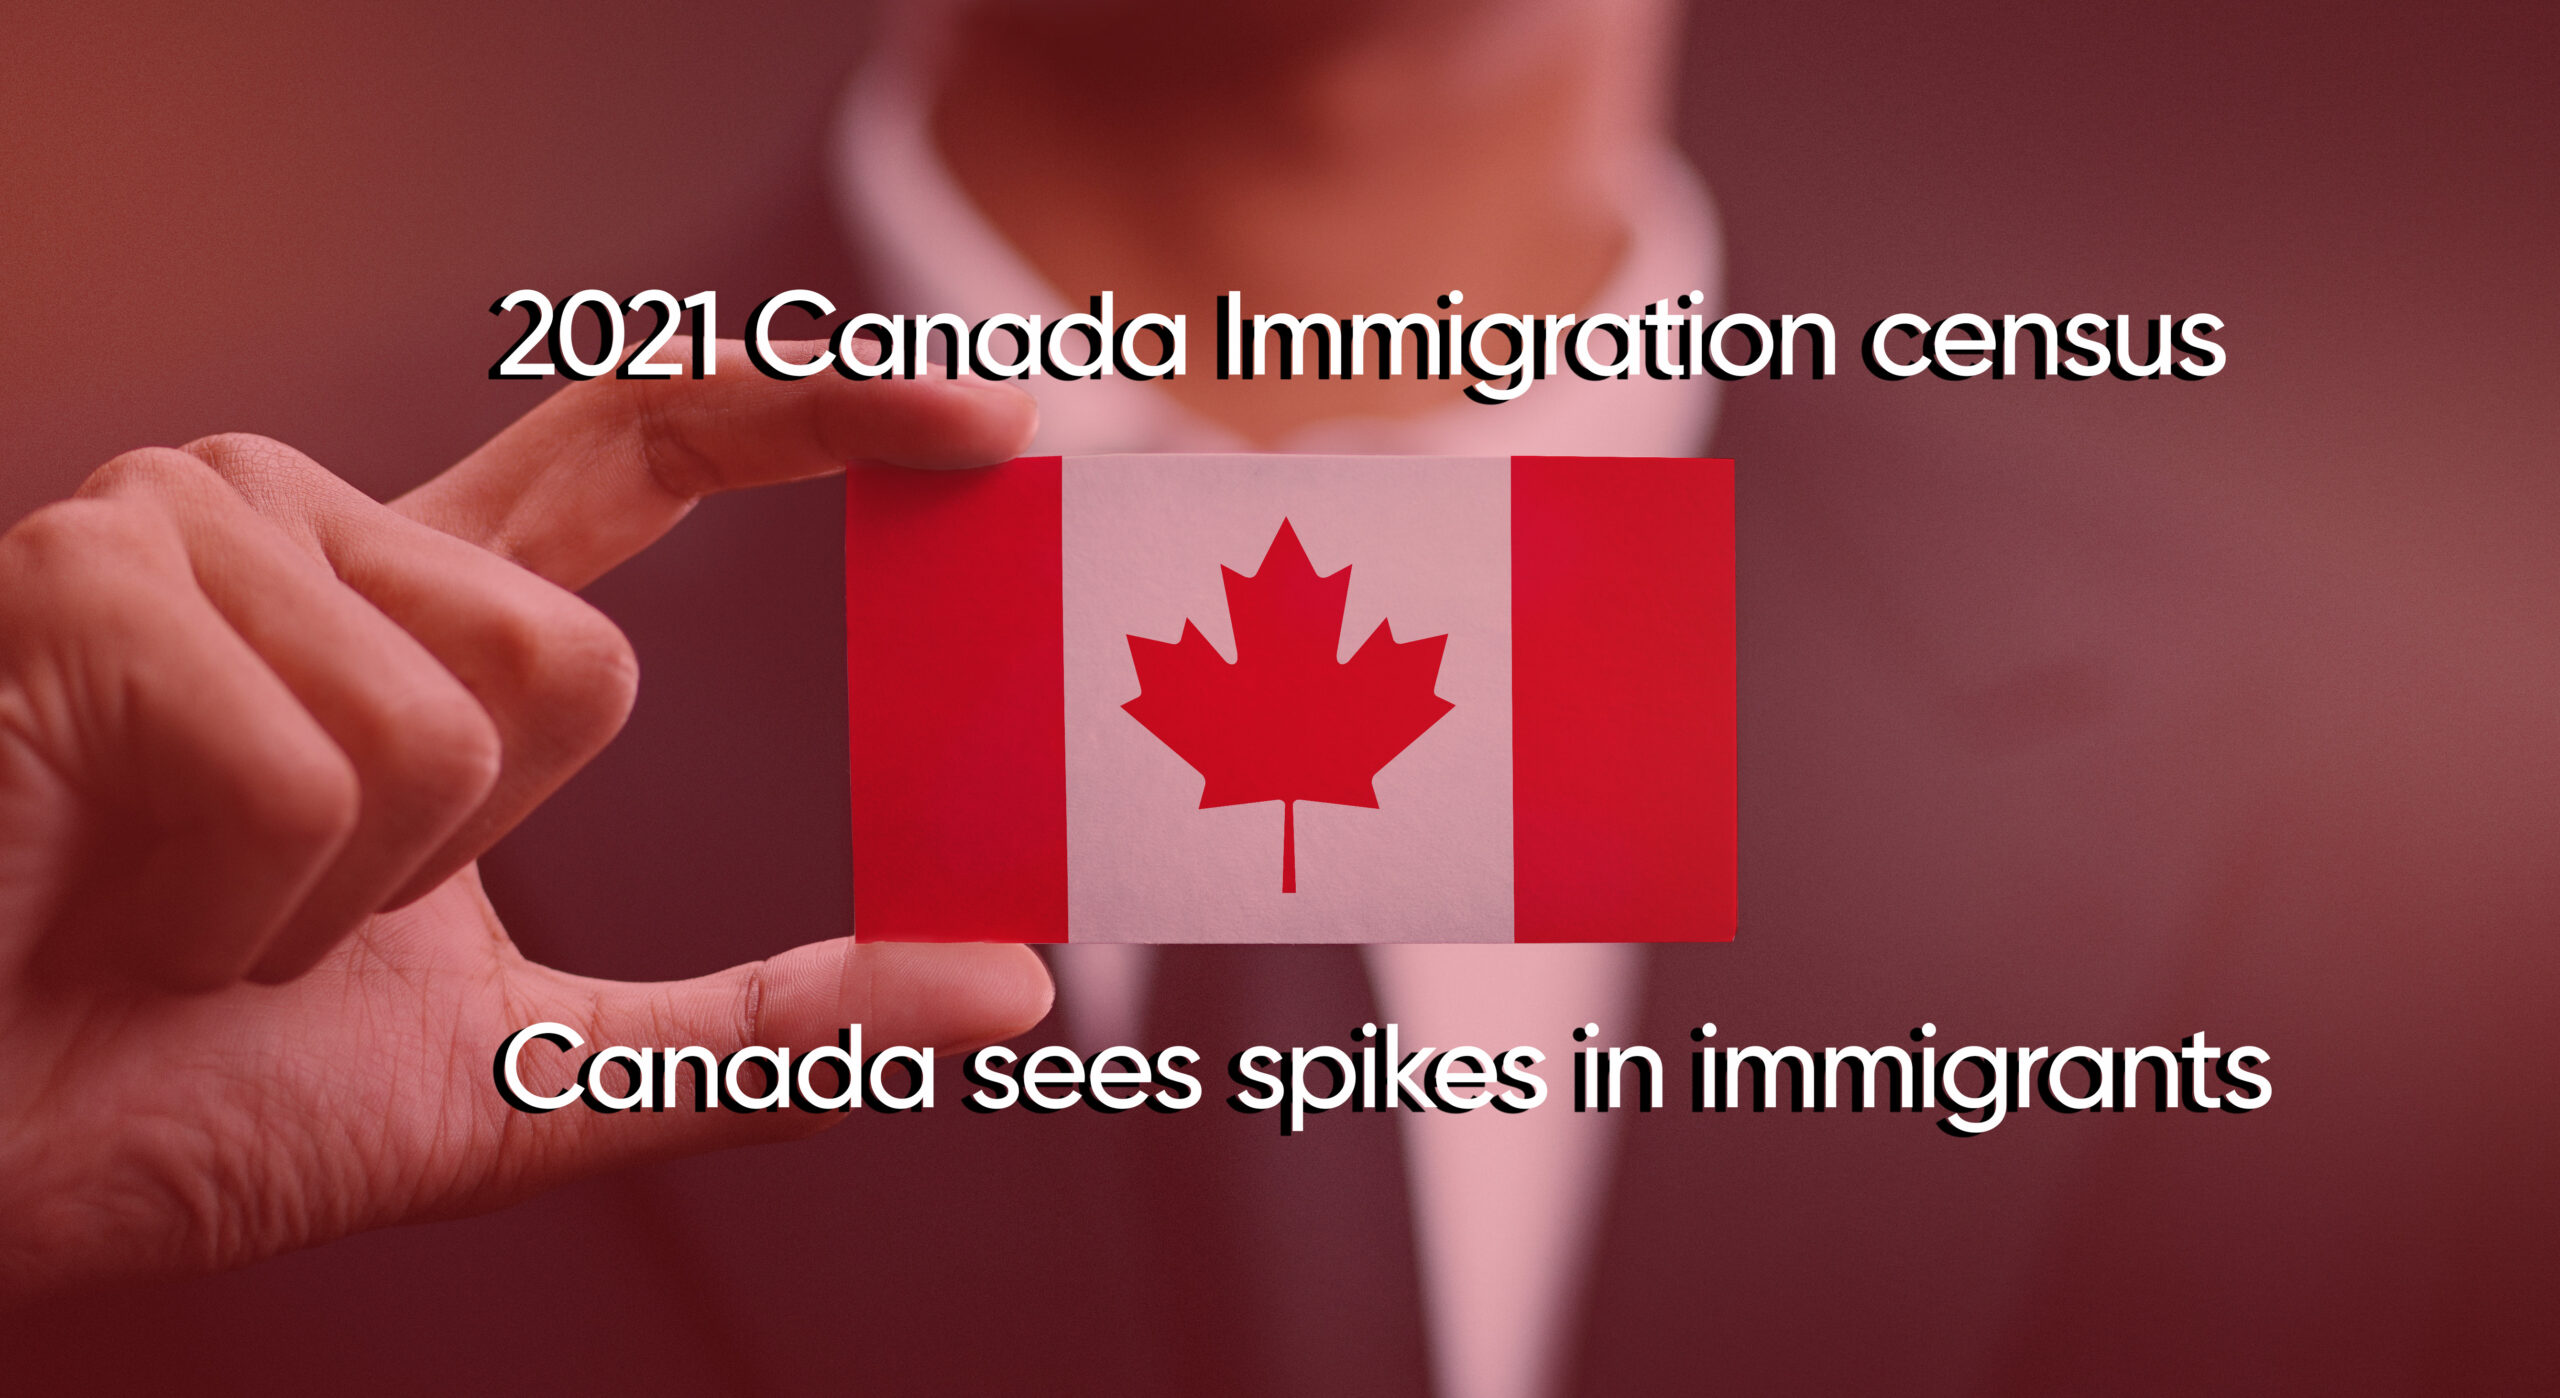 One fourth of Canada’s Population is immigrant- A whopping 8.3 million!